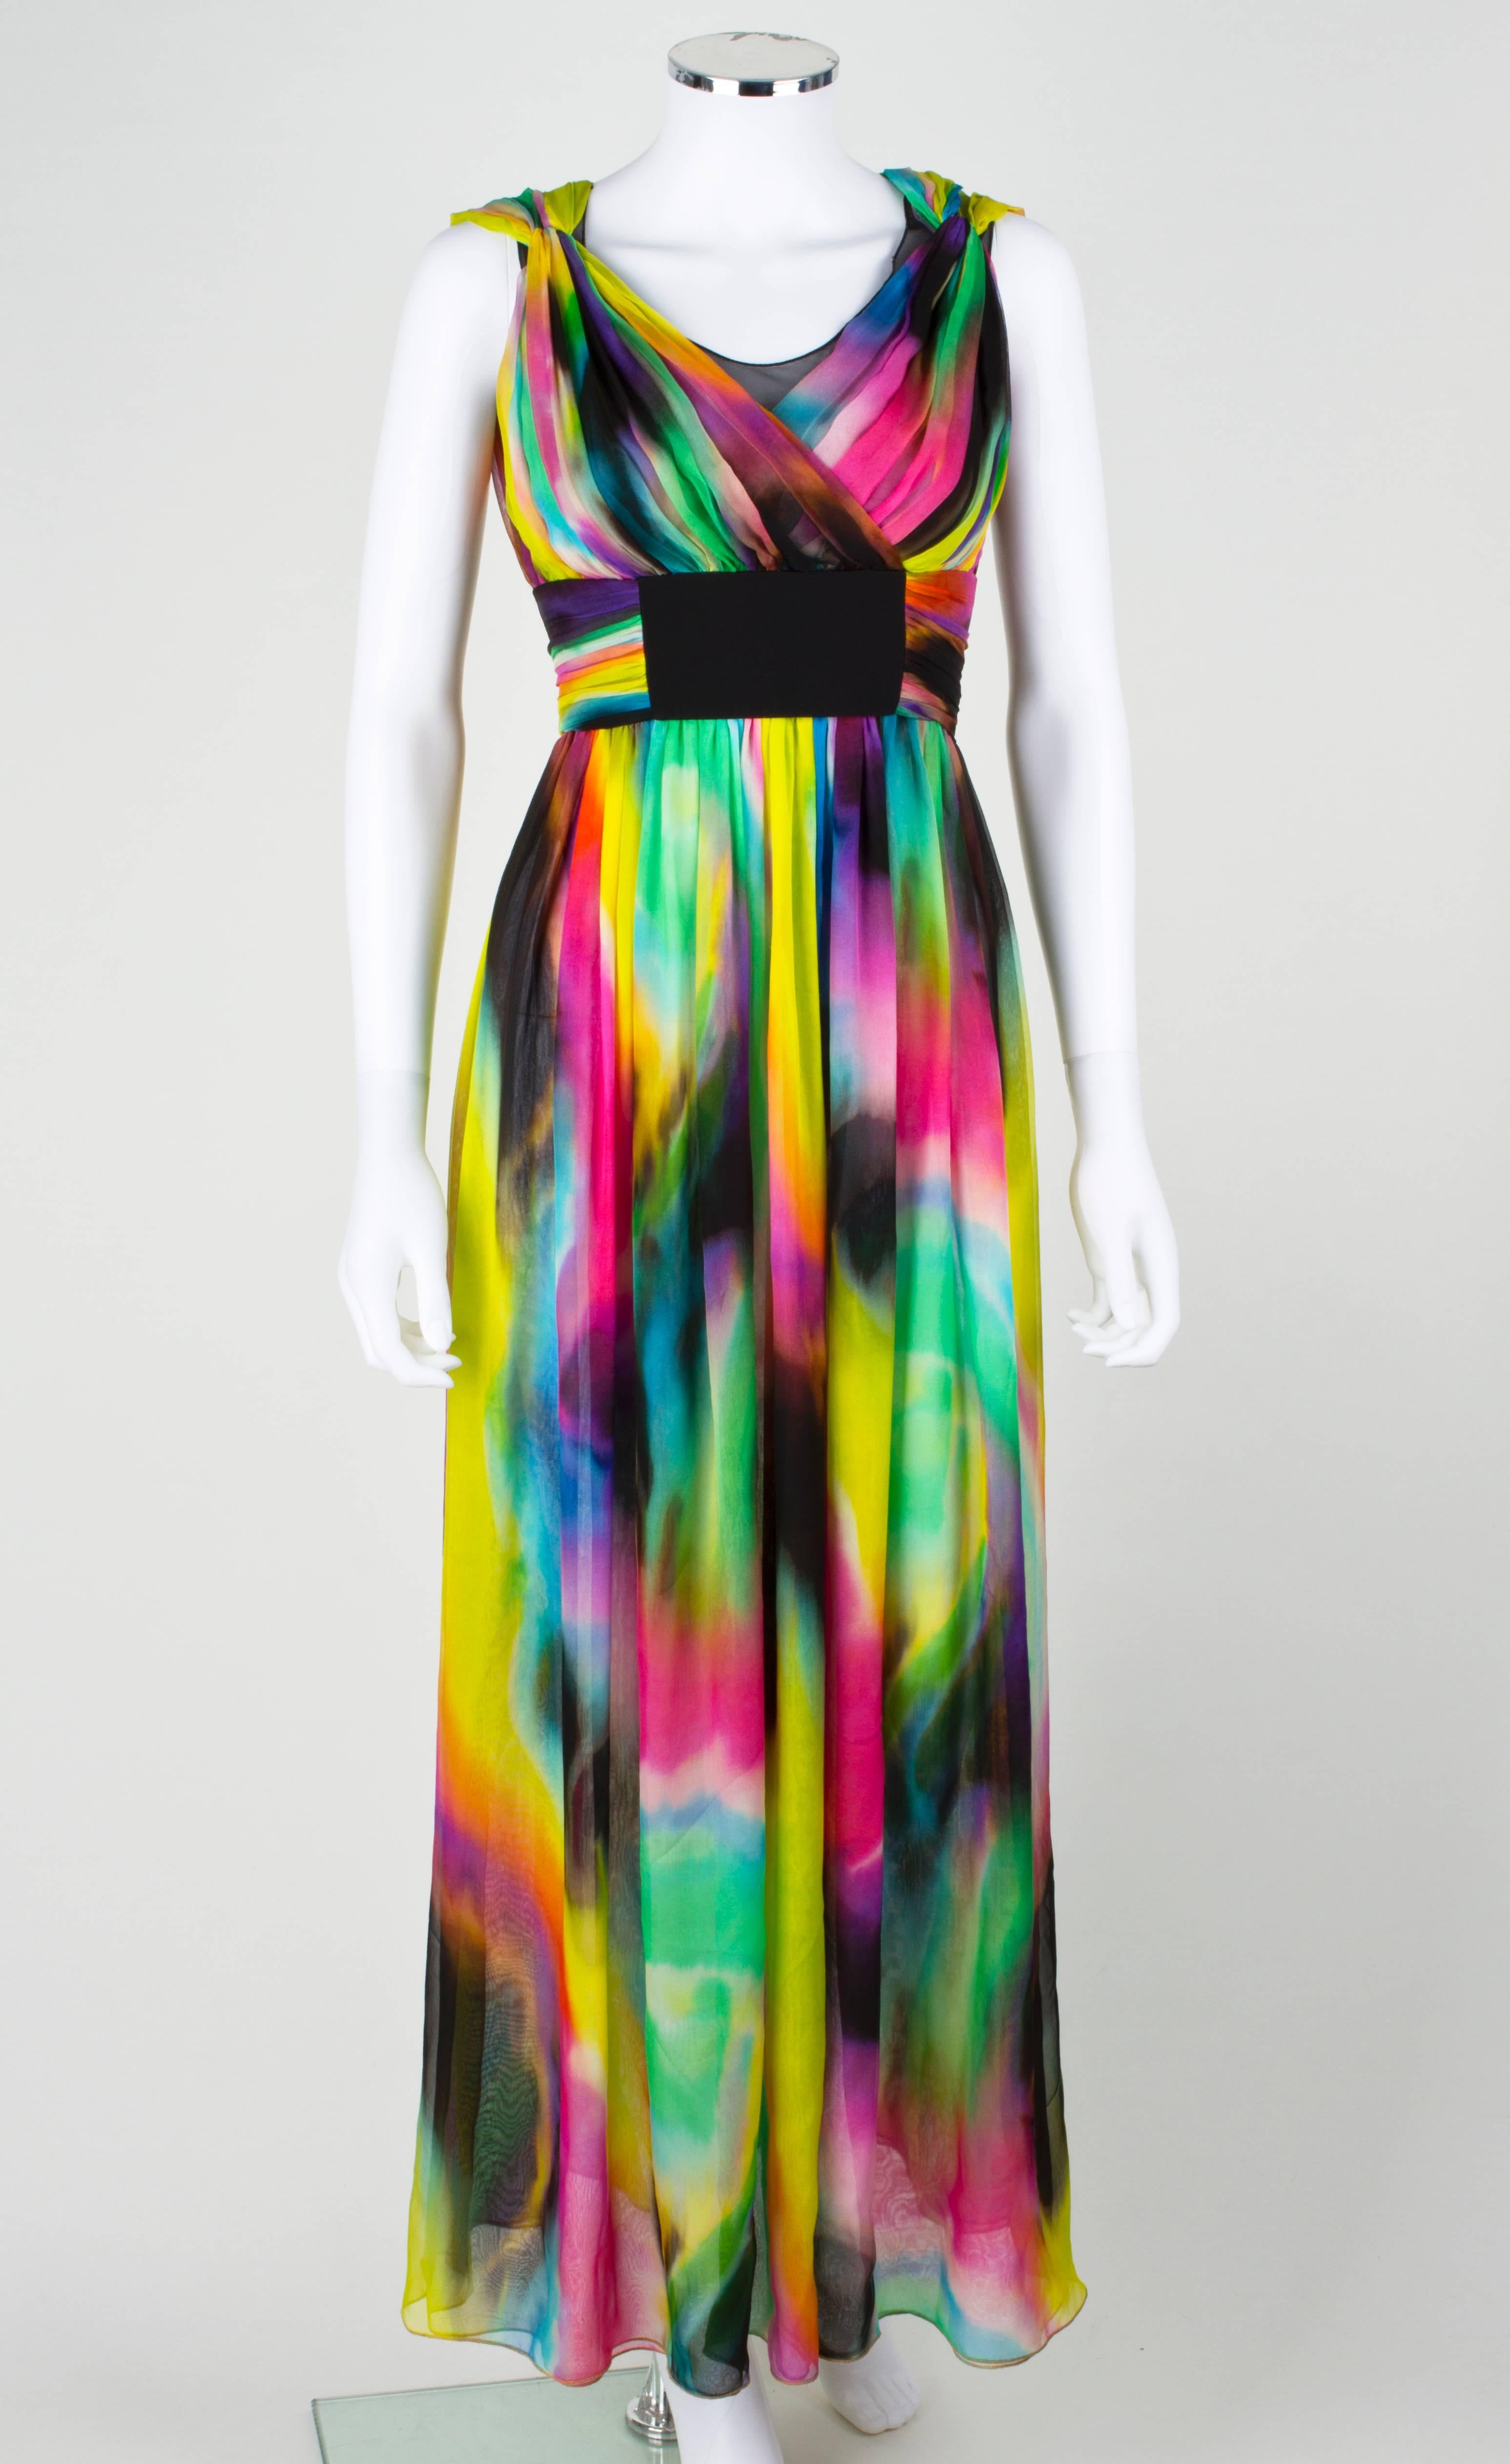 Dolce & Gabbana multi-color tie dye silk long gown. High waistline with gathered silk and black stretch material detail. Exposed metal zip closure at back. Bodice is lined in black mesh. From the pre-fall 2008 collection.
Marked Fabric Content: 